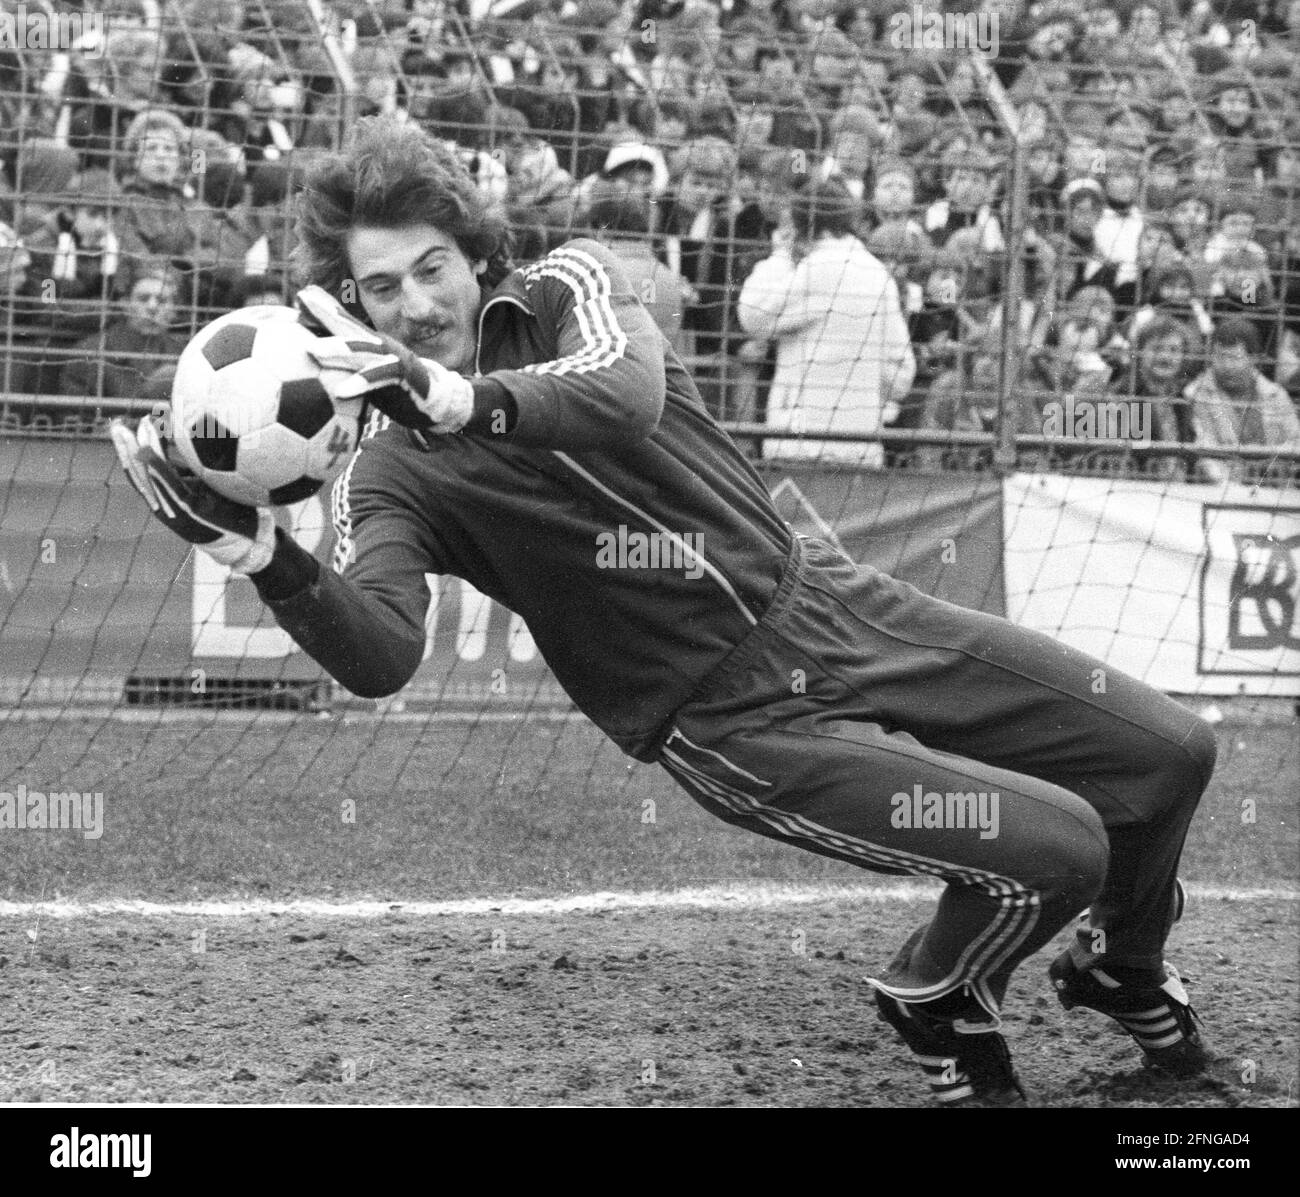 Arminia Bielefeld - Hannover 96 2:0 / 15.03.1980 / Goalkeeper Uli Ulrich Stein (Arm.) DFL REGULATIONS PROHIBIT ANY USE OF PHOTOGRAPHS AS IMAGE SEQUENCES AND/OR QUASI-VIDEO [automated translation] Stock Photo